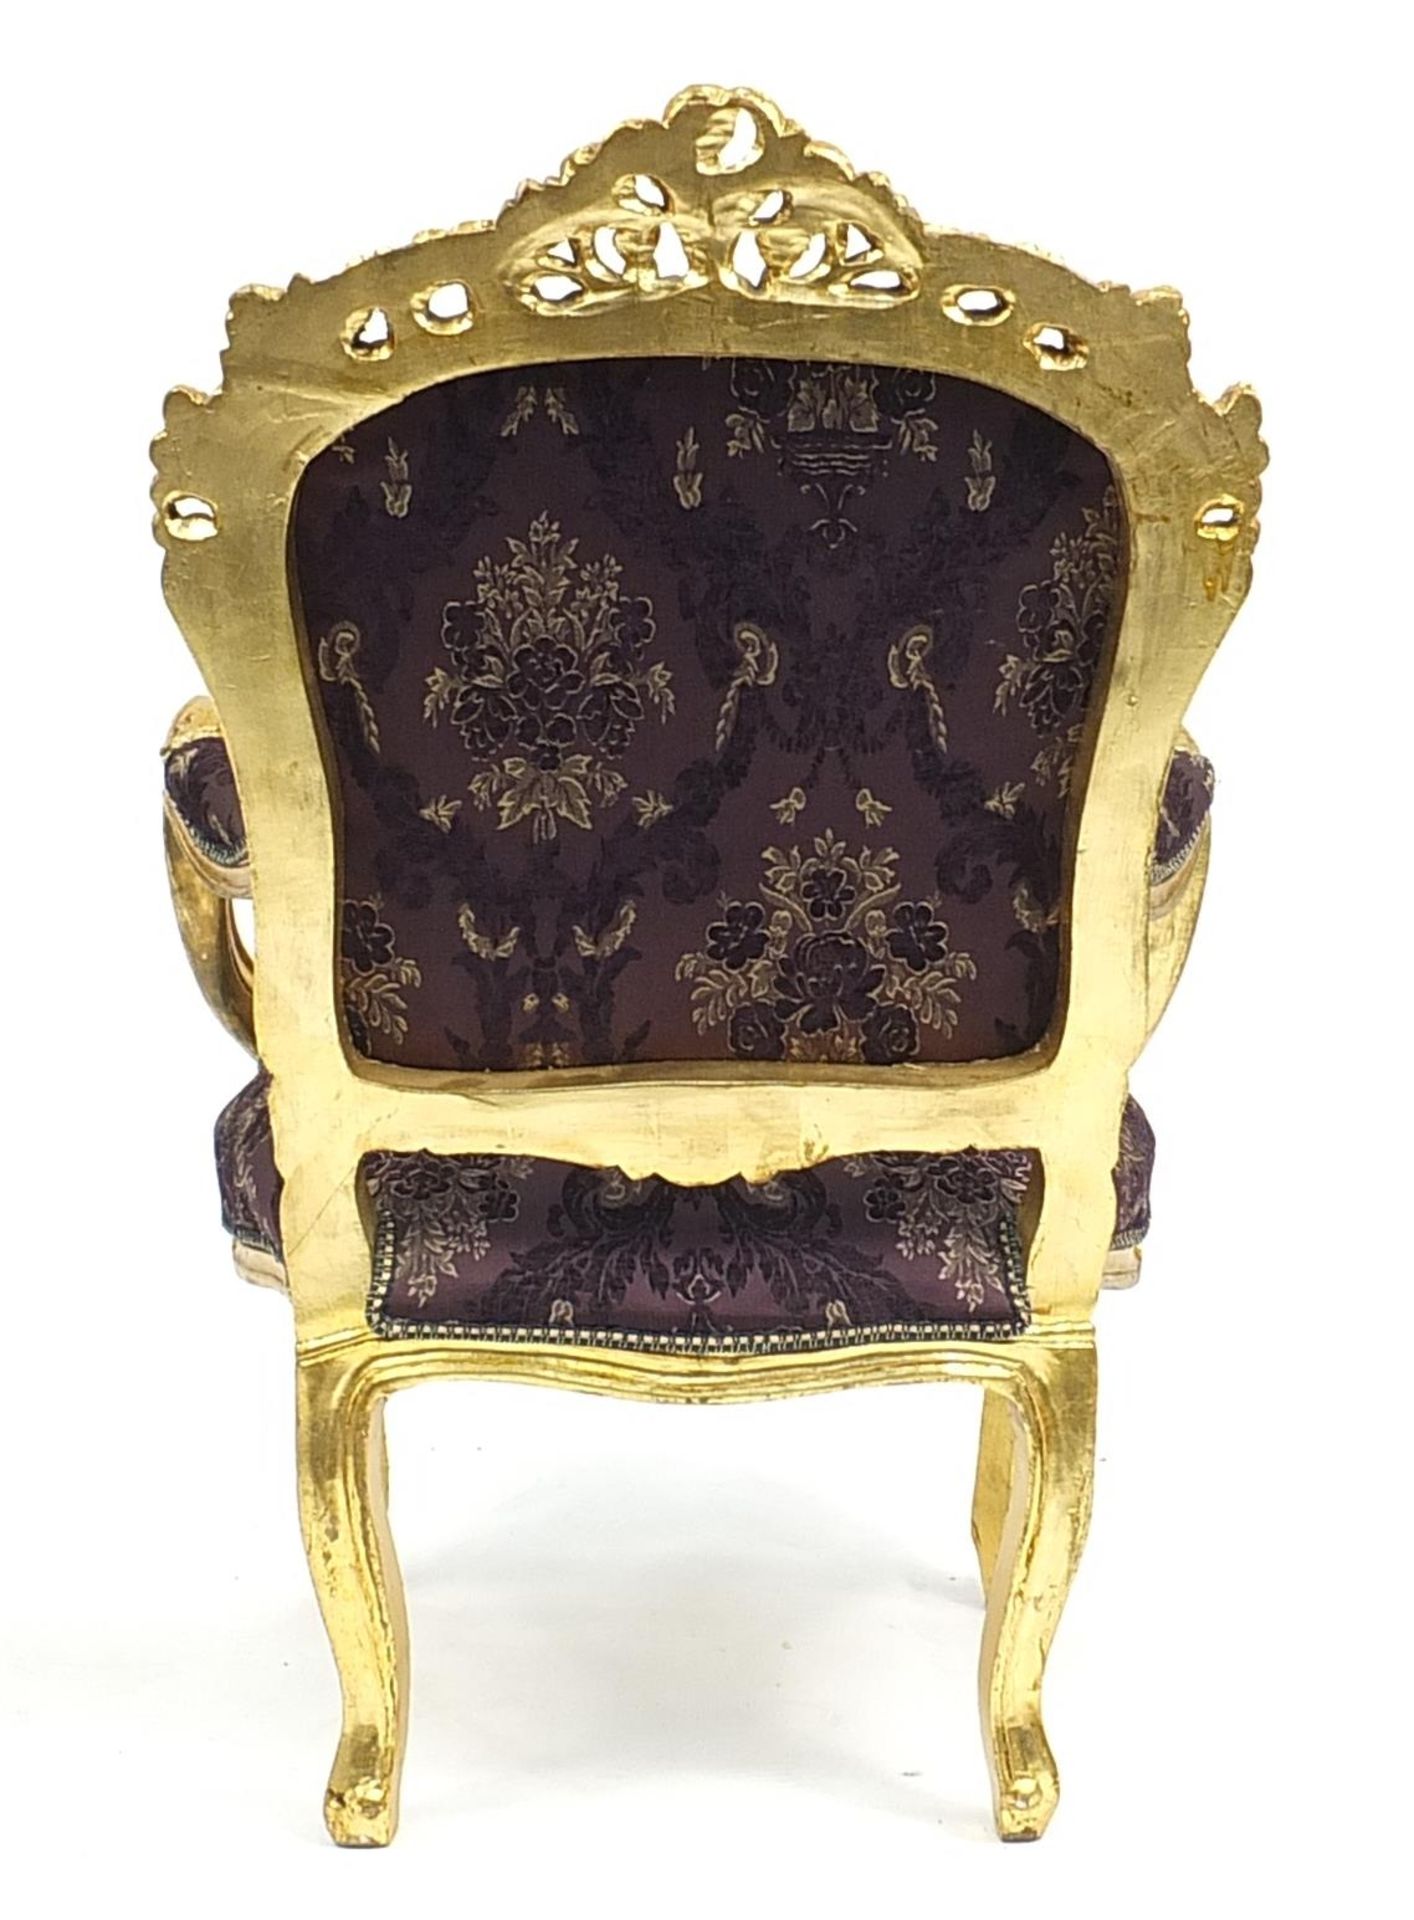 Ornate French style giltwood open armchair with purple floral upholstery, 112cm high - Image 3 of 3